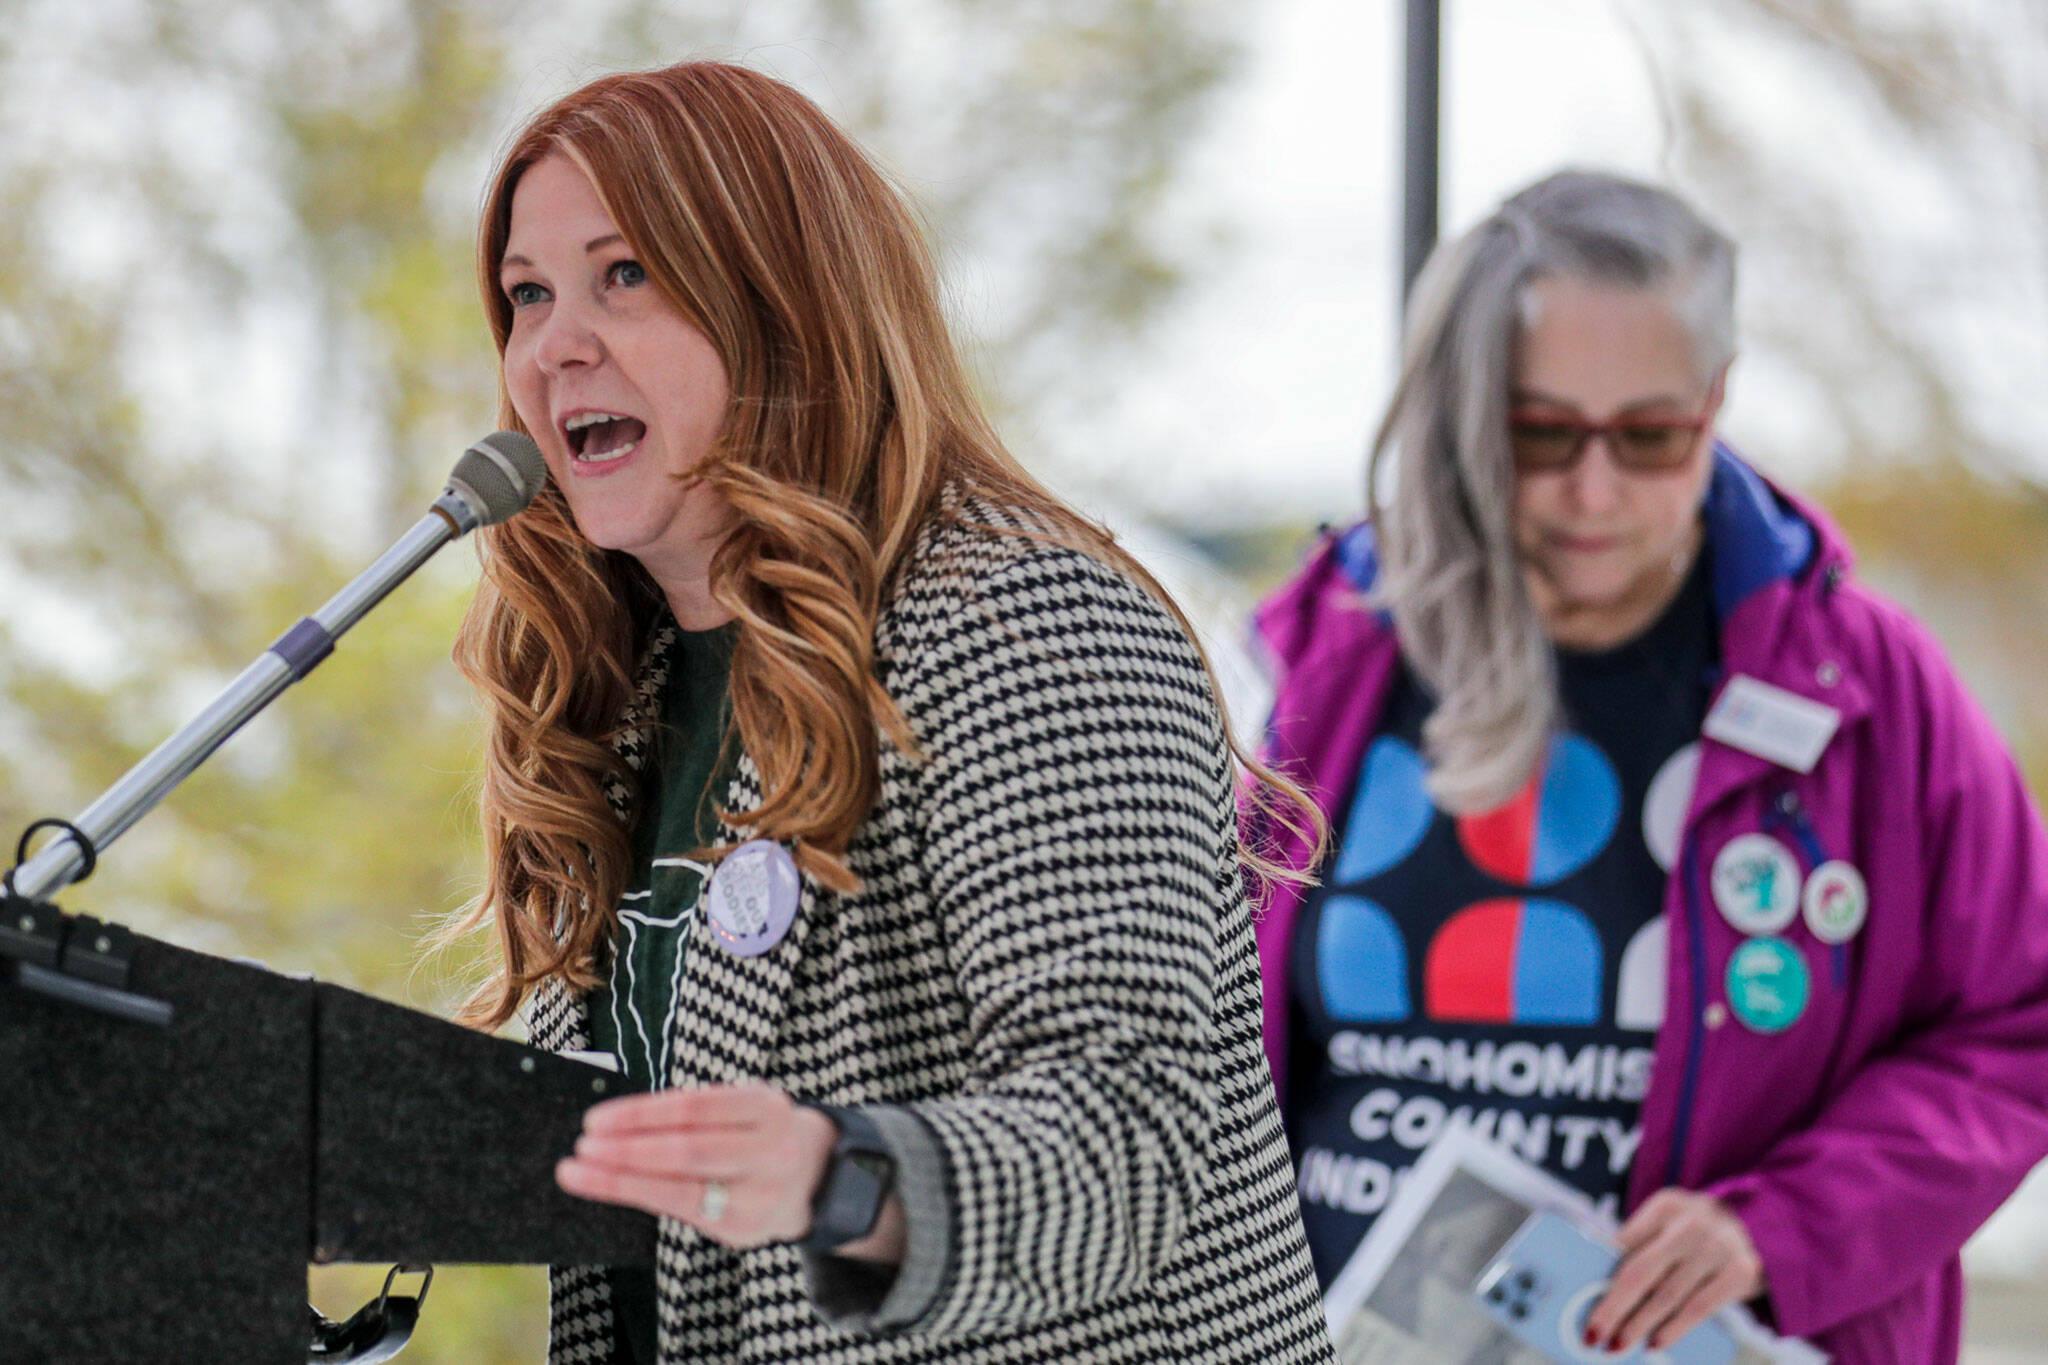 Rep. Emily Wicks addresses the gathering during the abortion rights rally at the Snohomish County Courthouse Plaza in Everett, on May 3. (Kevin Clark / The Herald)